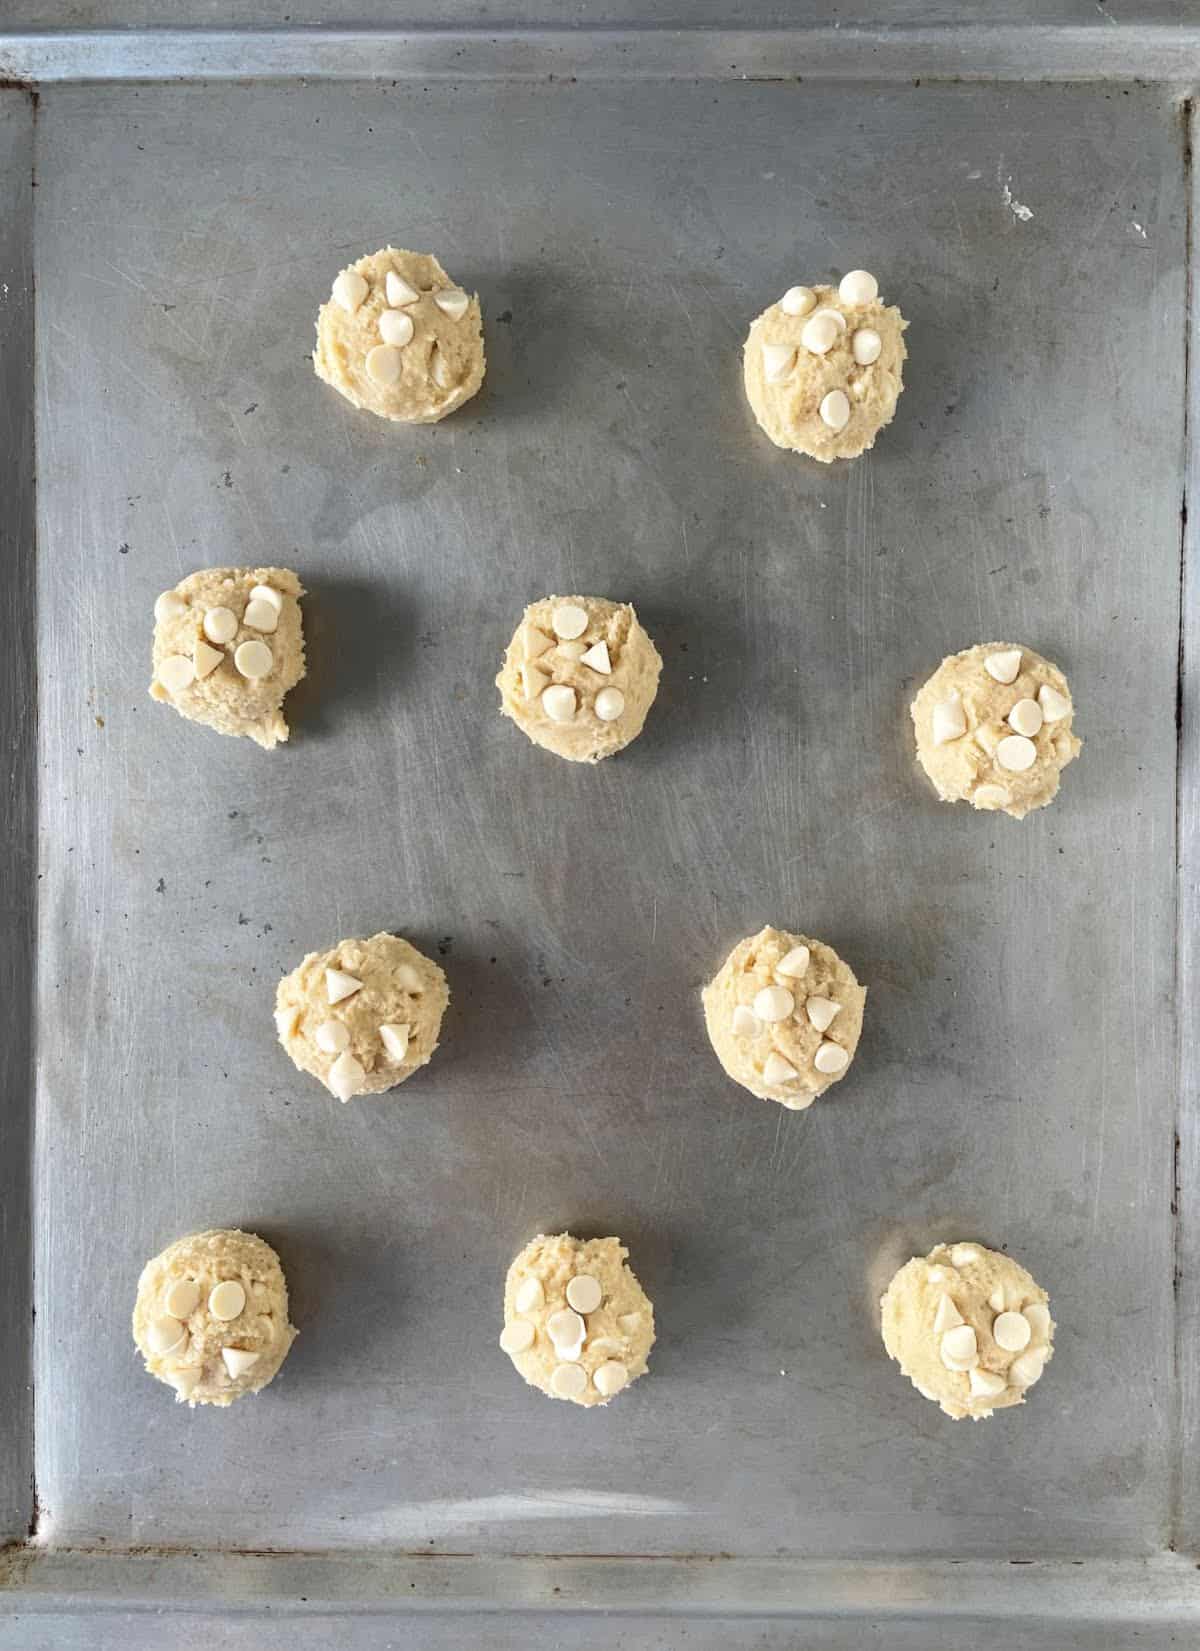 Baking metal sheet with scoops of unbaked white chocolate cookies